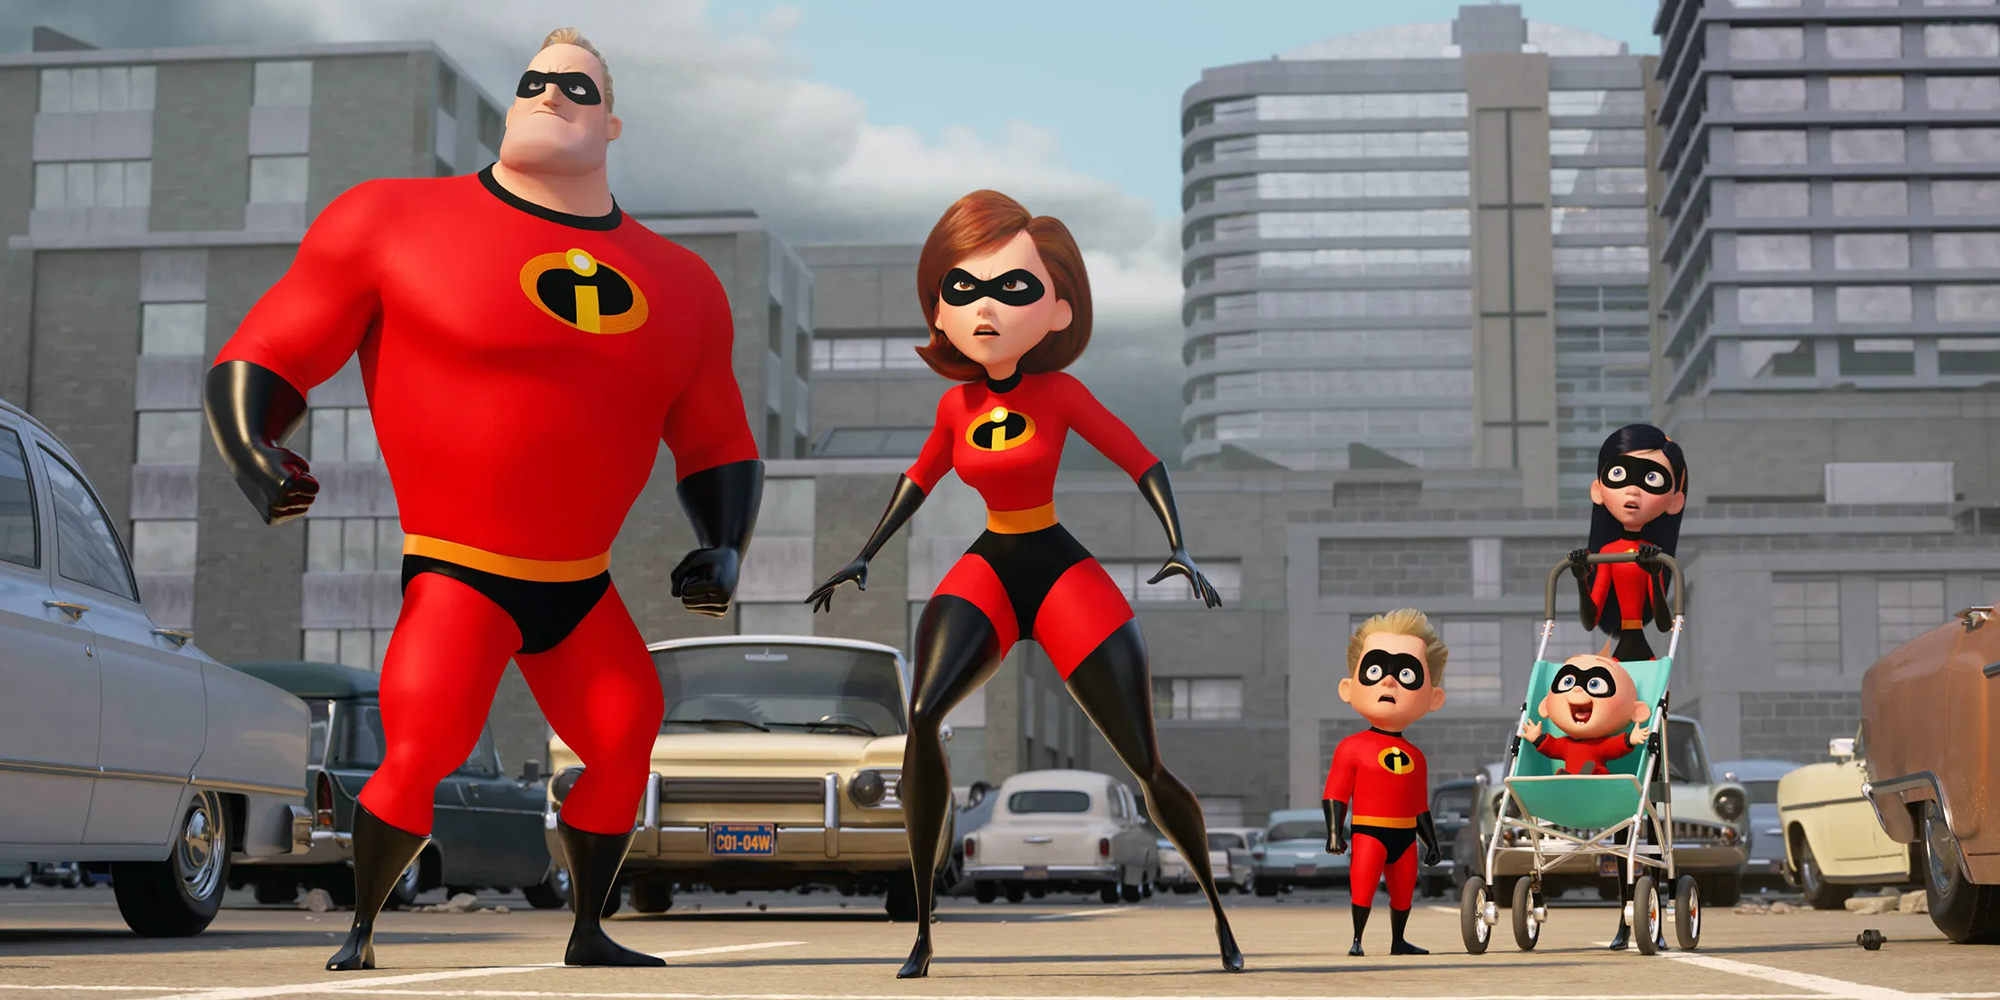 Cast of the Incredibles standing outside in traffic.